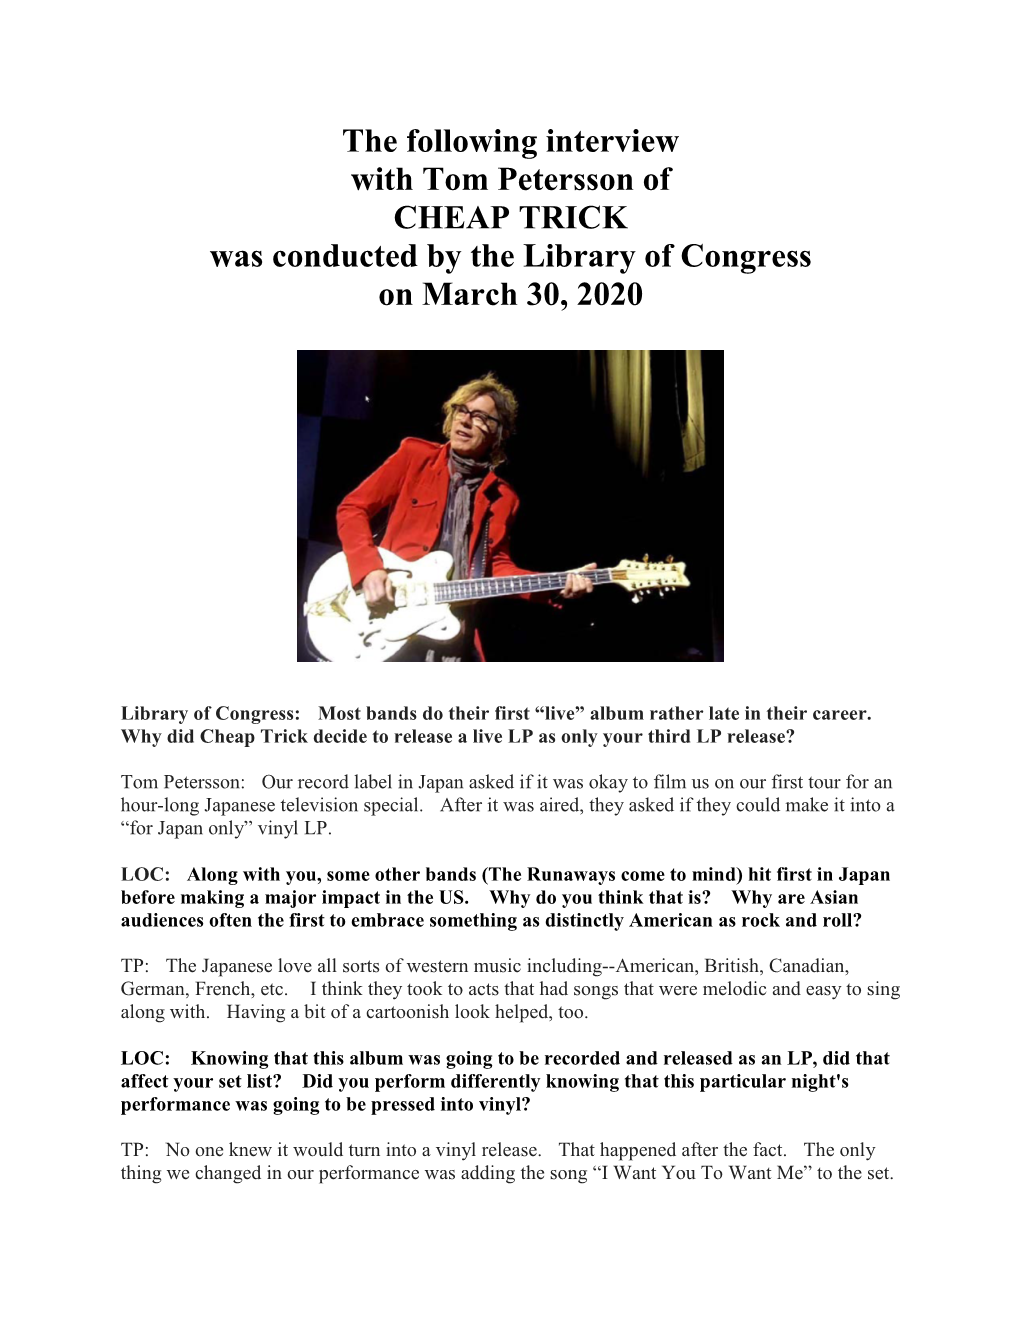 Interview with Tom Petersson of CHEAP TRICK Was Conducted by the Library of Congress on March 30, 2020